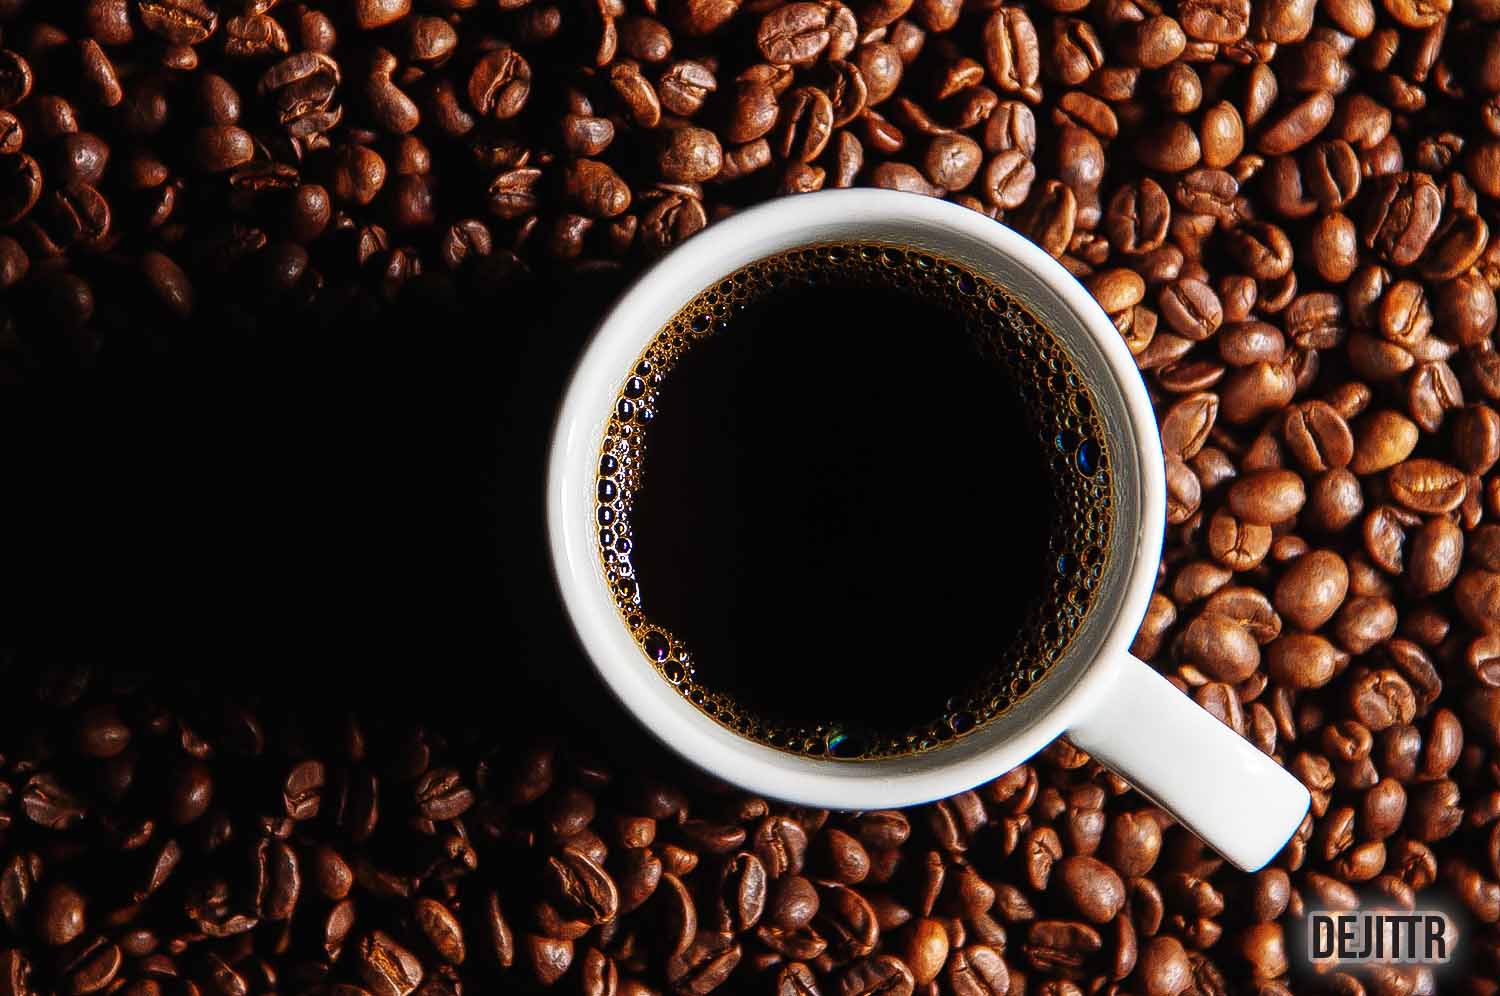 Top View Of White Cup Filled With Coffee On Top of Coffee Beans Background